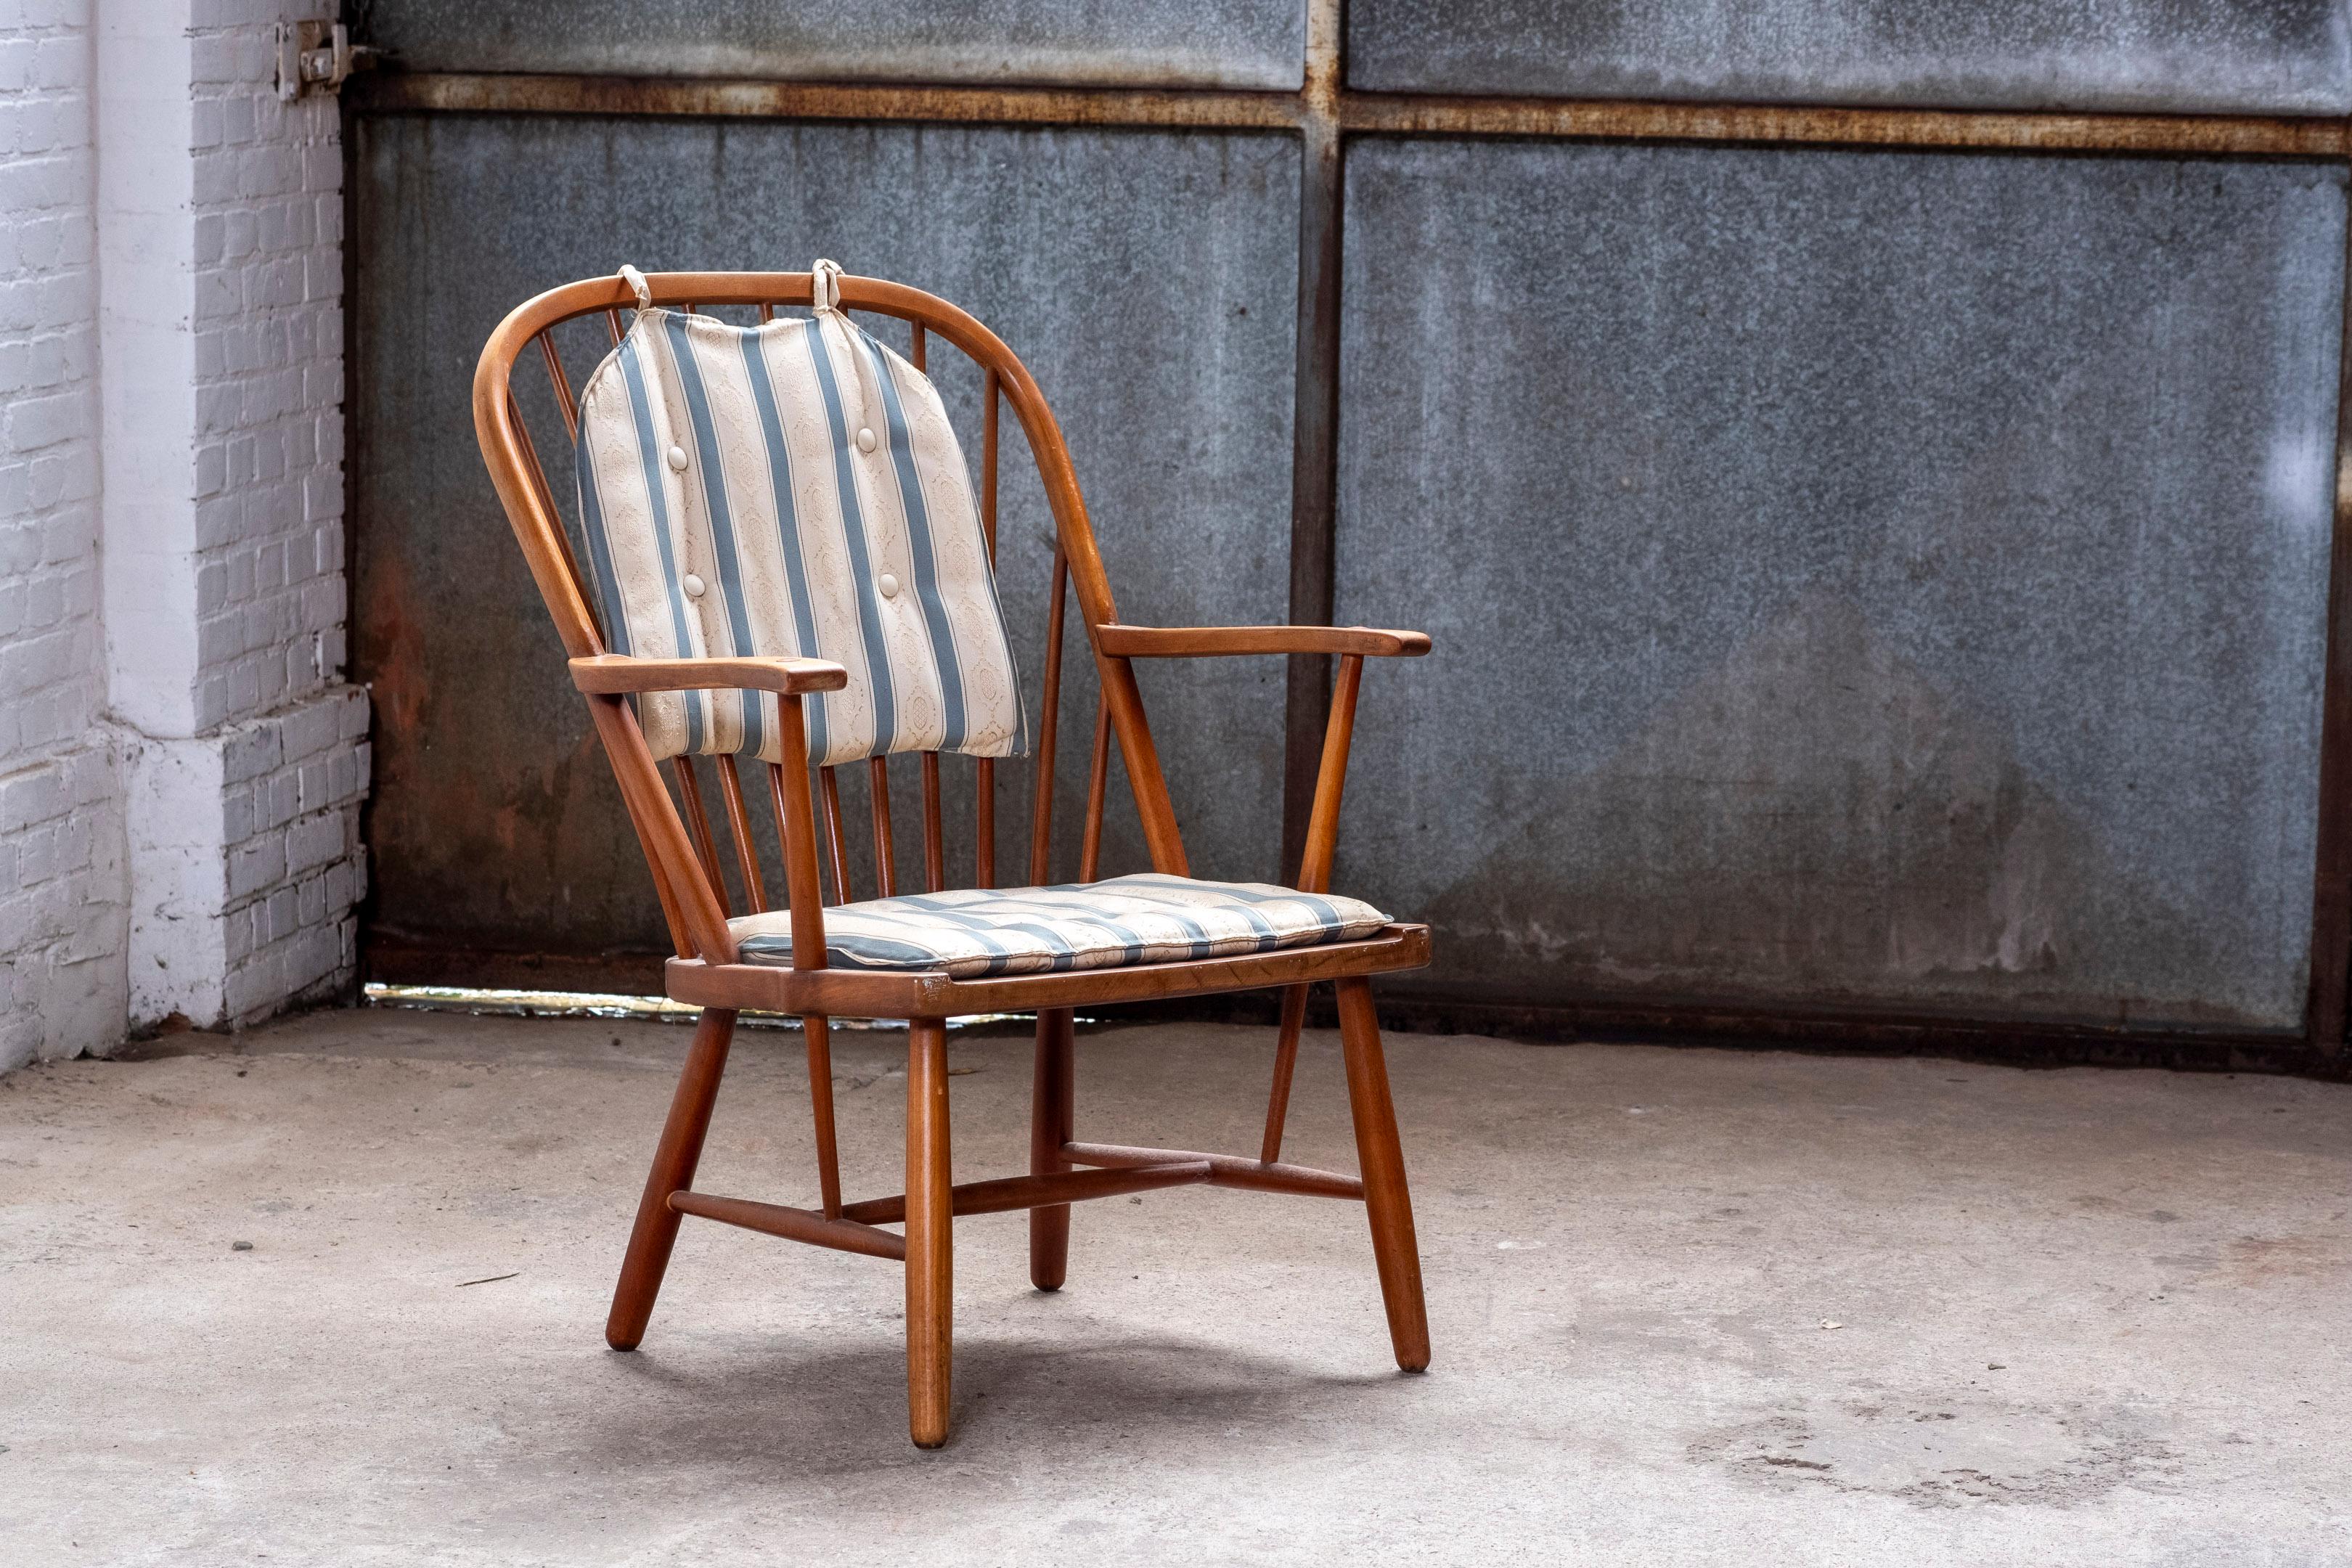 Original and early Fritz Hansen Windsor armchair made in 1940 in Denmark.
The chair shows an interesting combination of original Windsor chair construction and joinery. The chair is unrestored and has a wonderful patina. The same goes for the